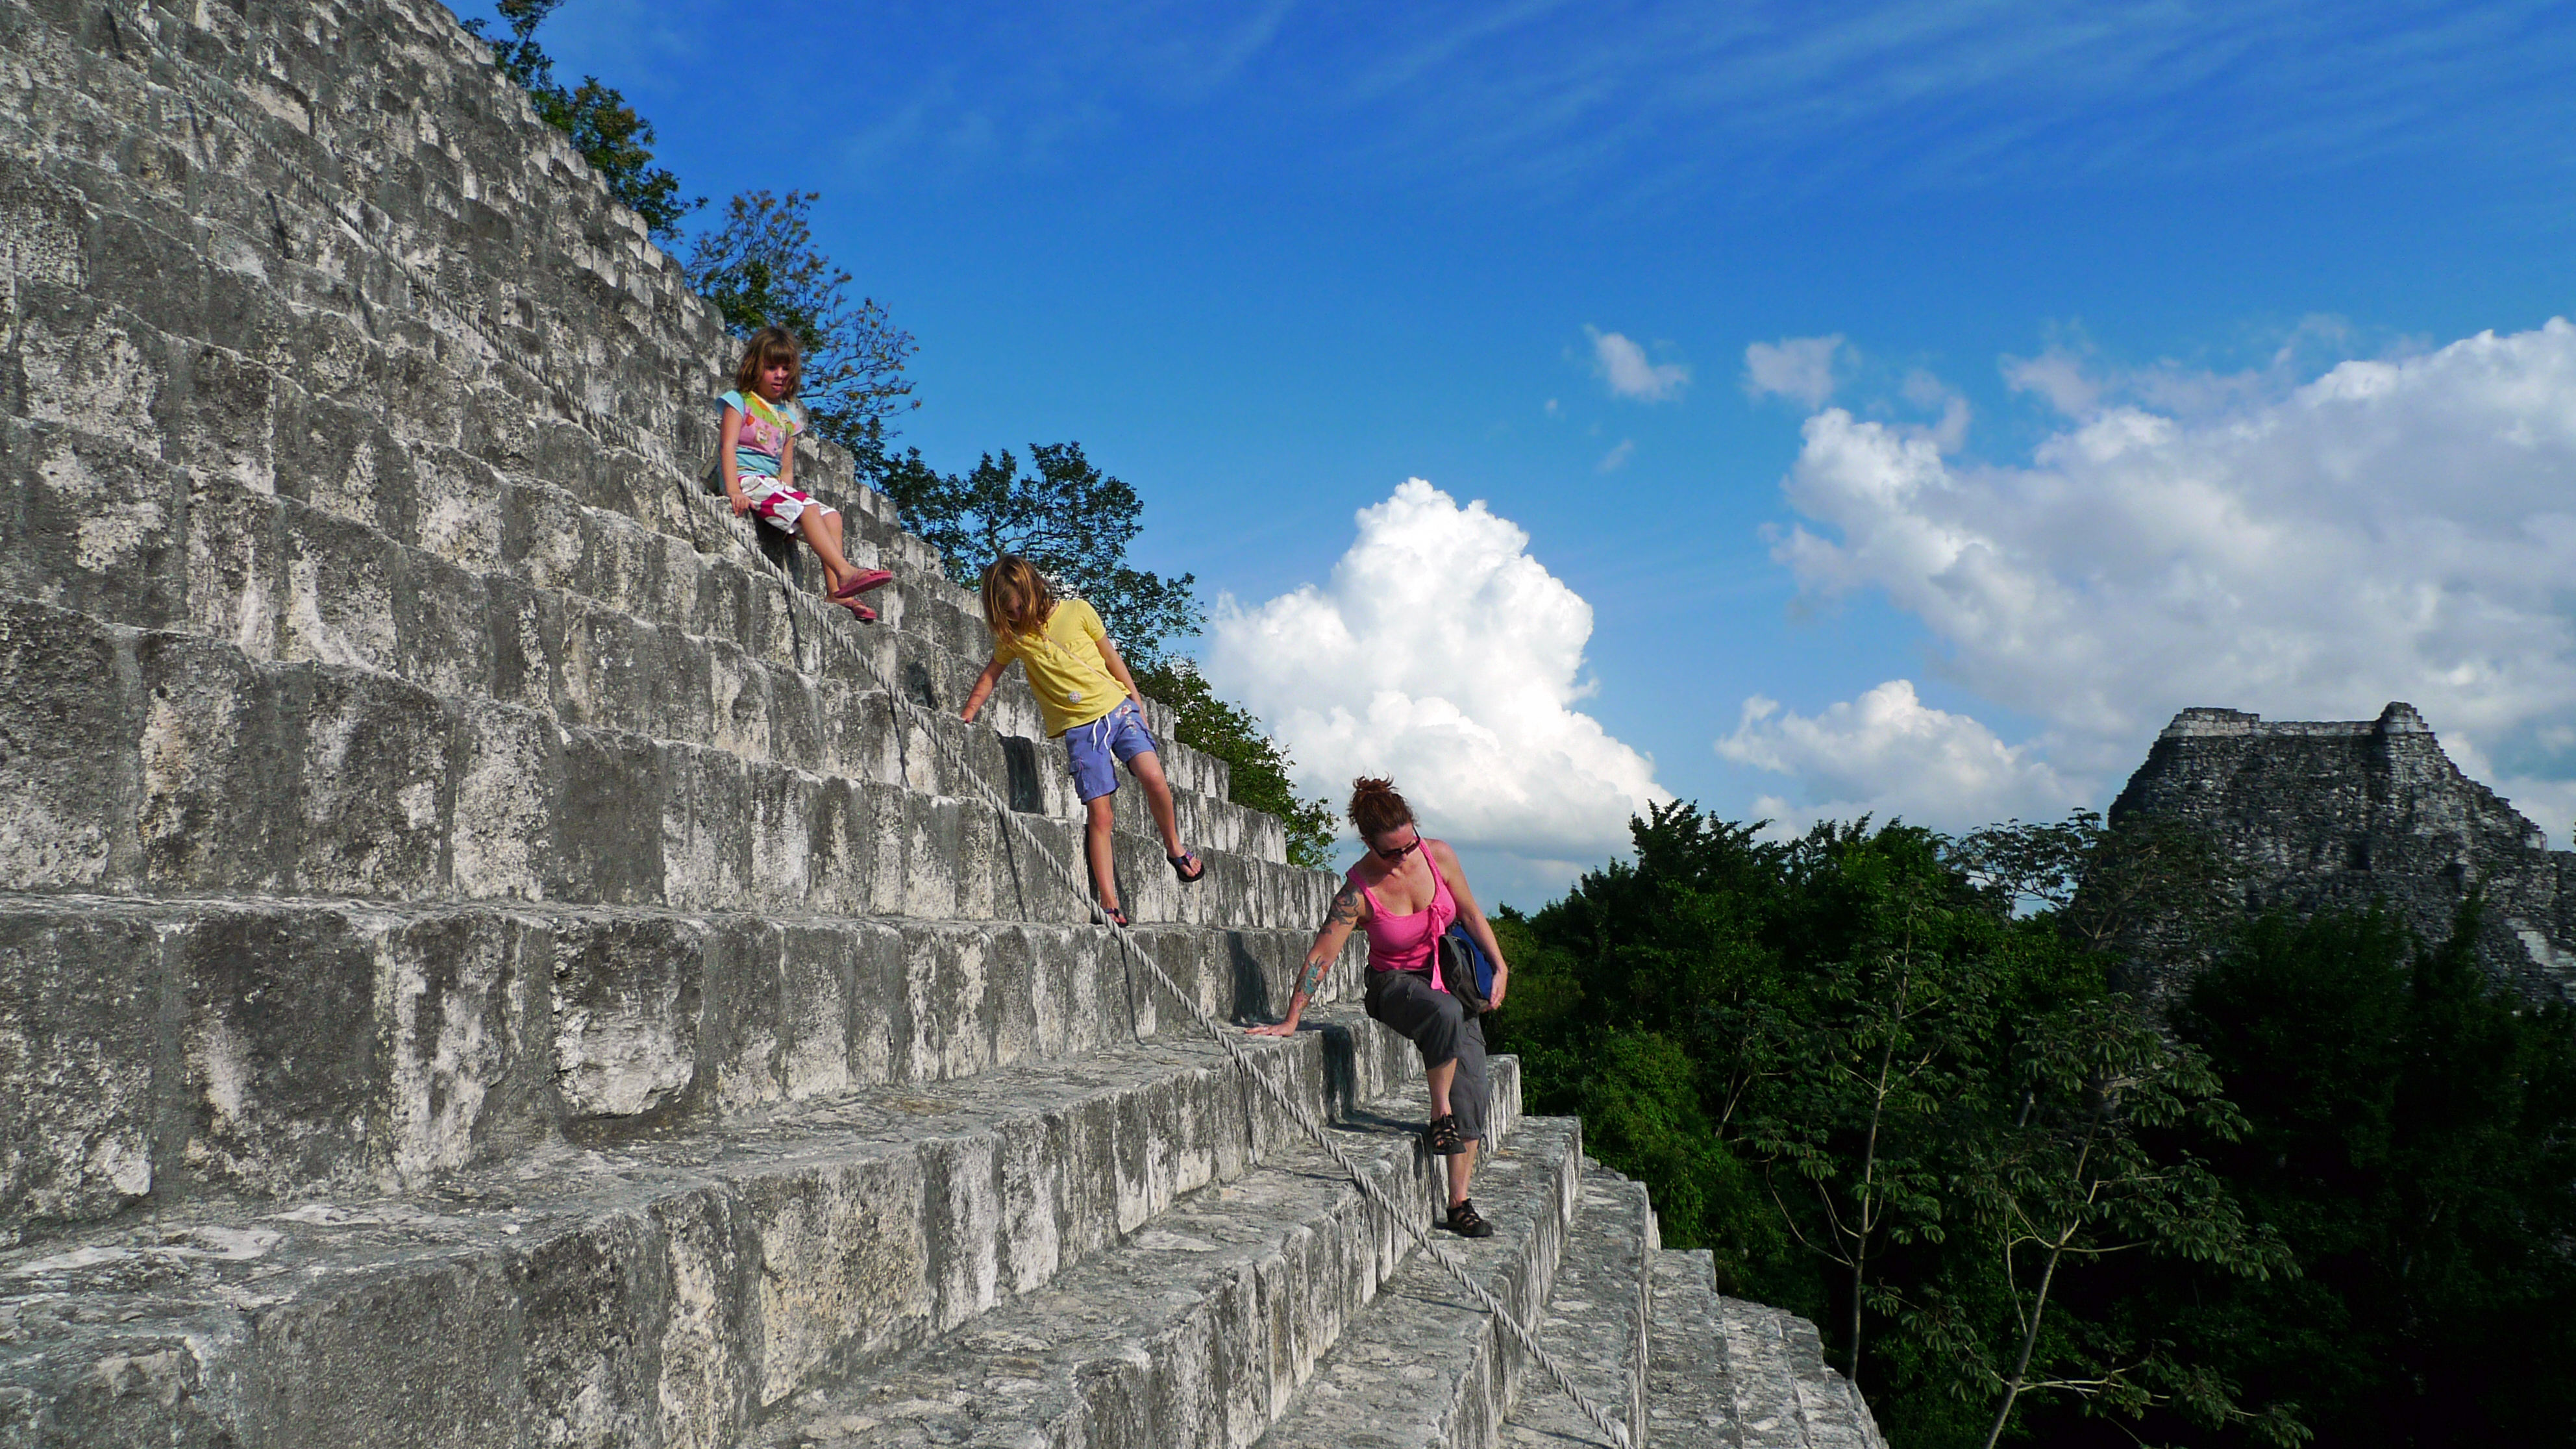 The family adventure in the Yucatan, Mexico:  The trip review and itinerary